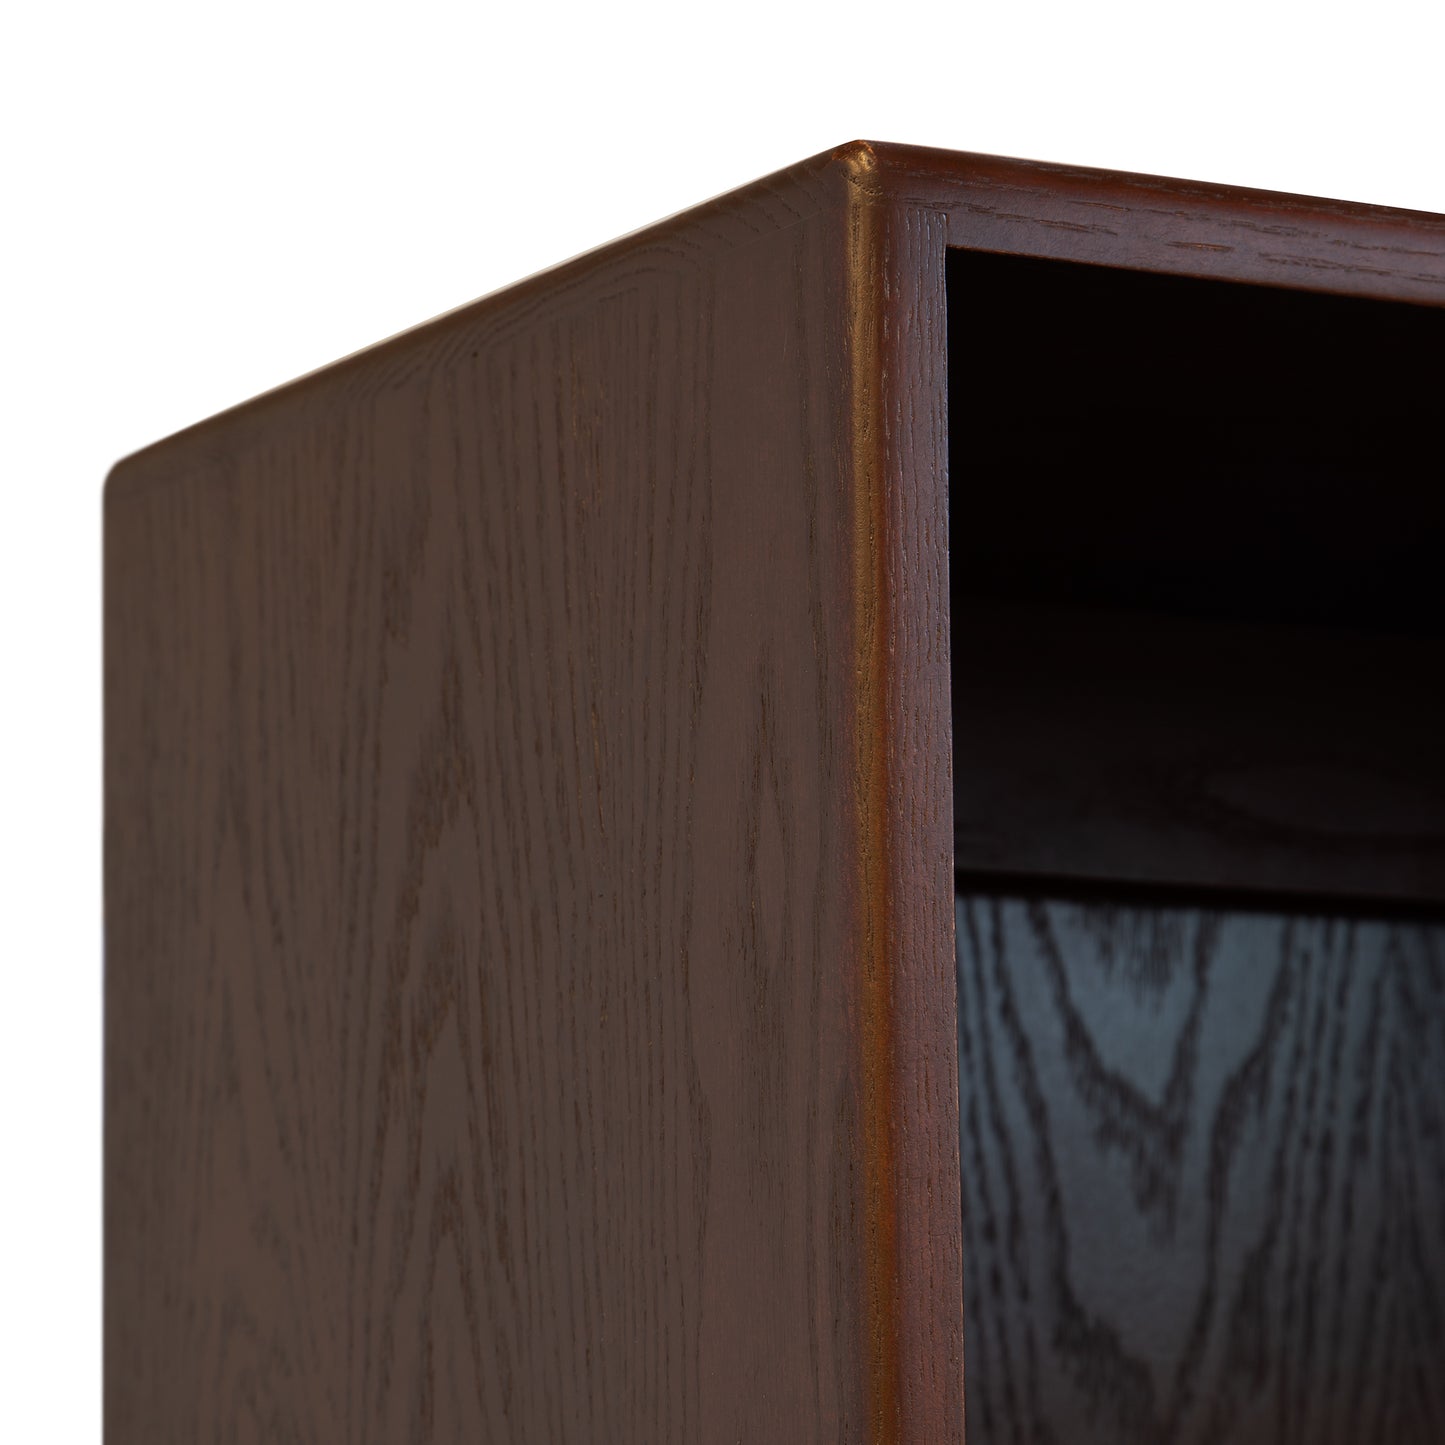 A Lyndon Furniture Custom Contemporary Wide Bookcase - 72" High - Clearance with a wooden shelf.